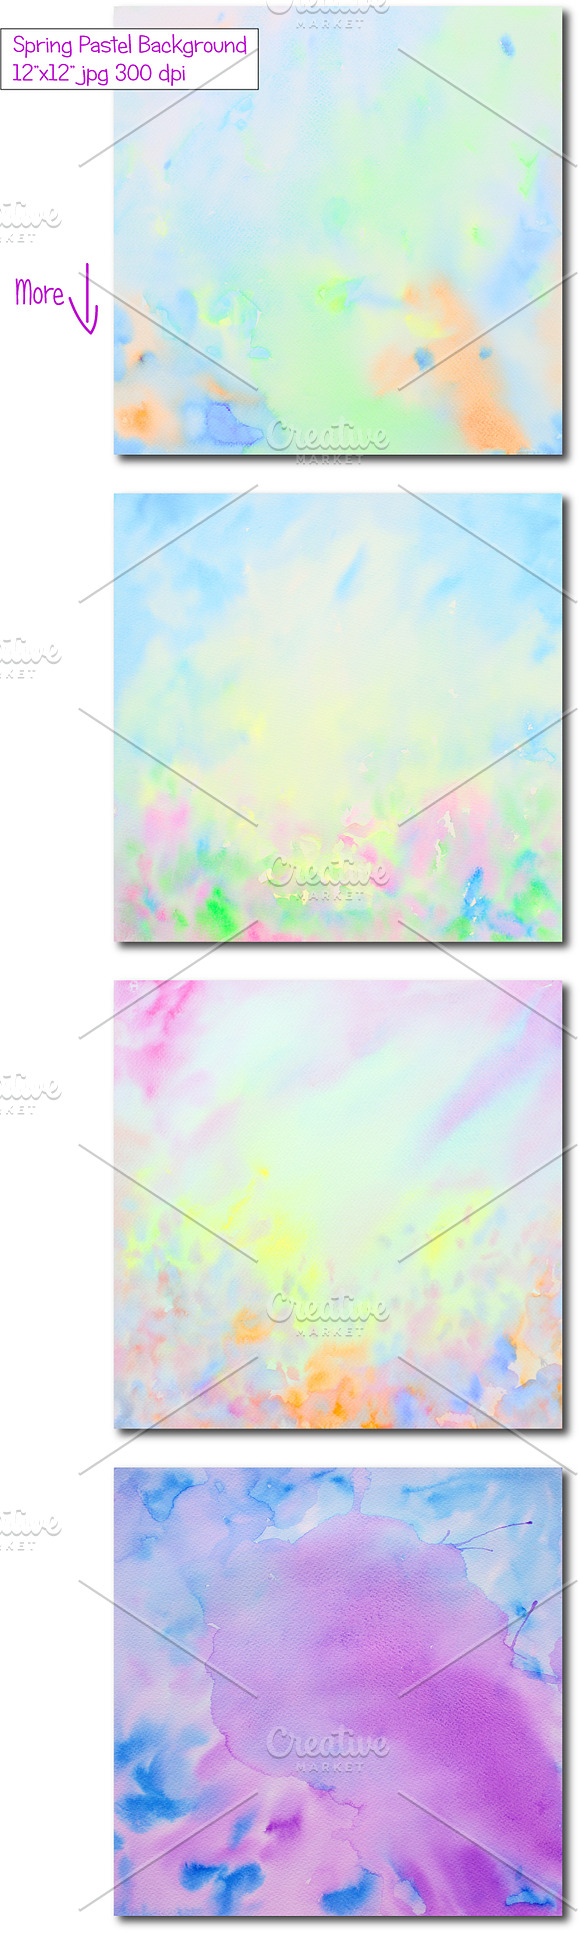 Abstract Spring Pastel Background in Patterns - product preview 1